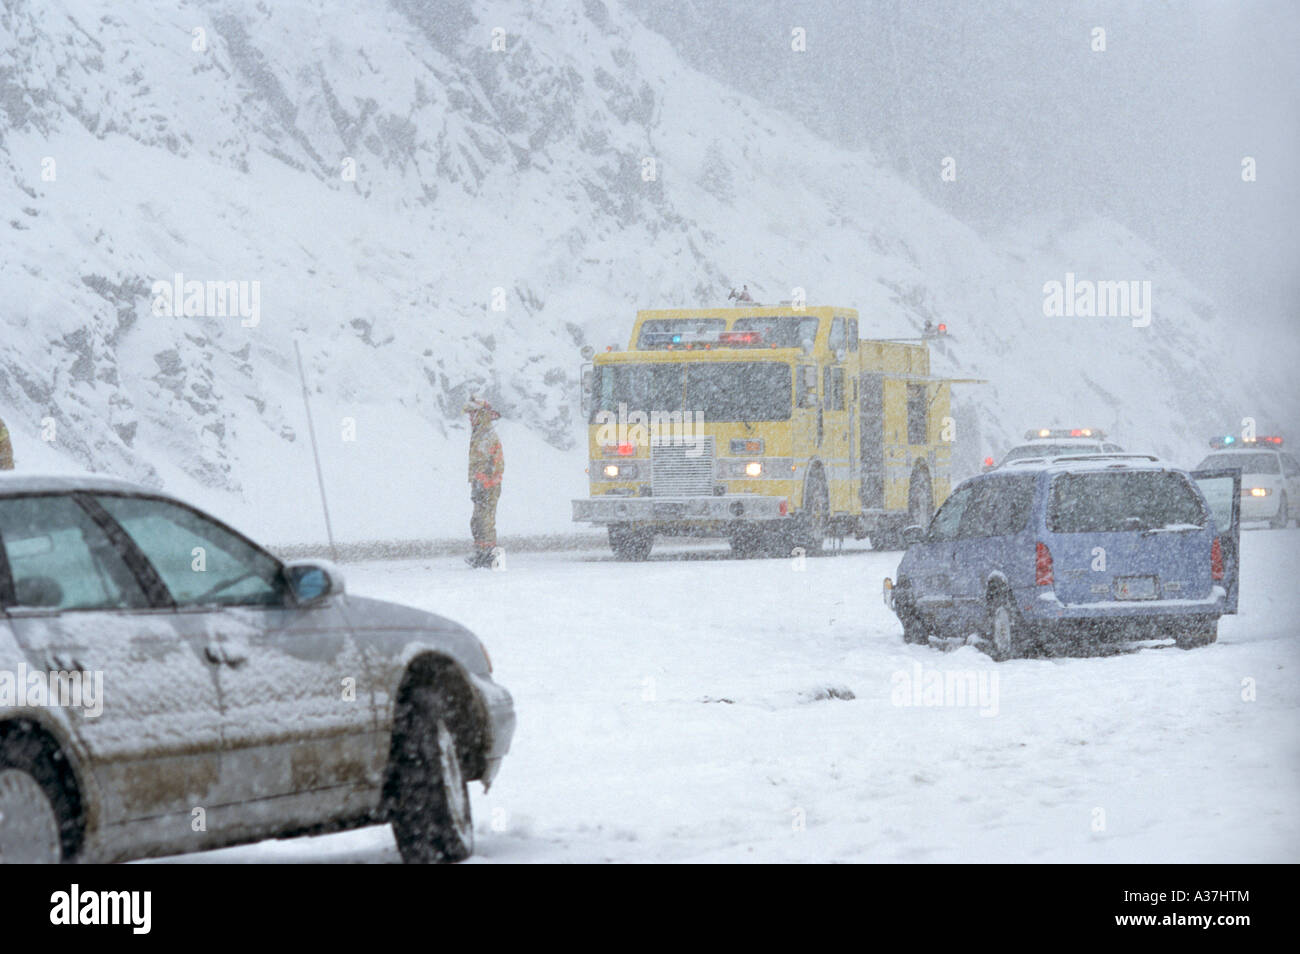 Accident caused by snow on I 70 in Colorado mountains near the Eisenhower Memorial Tunnel Stock Photo